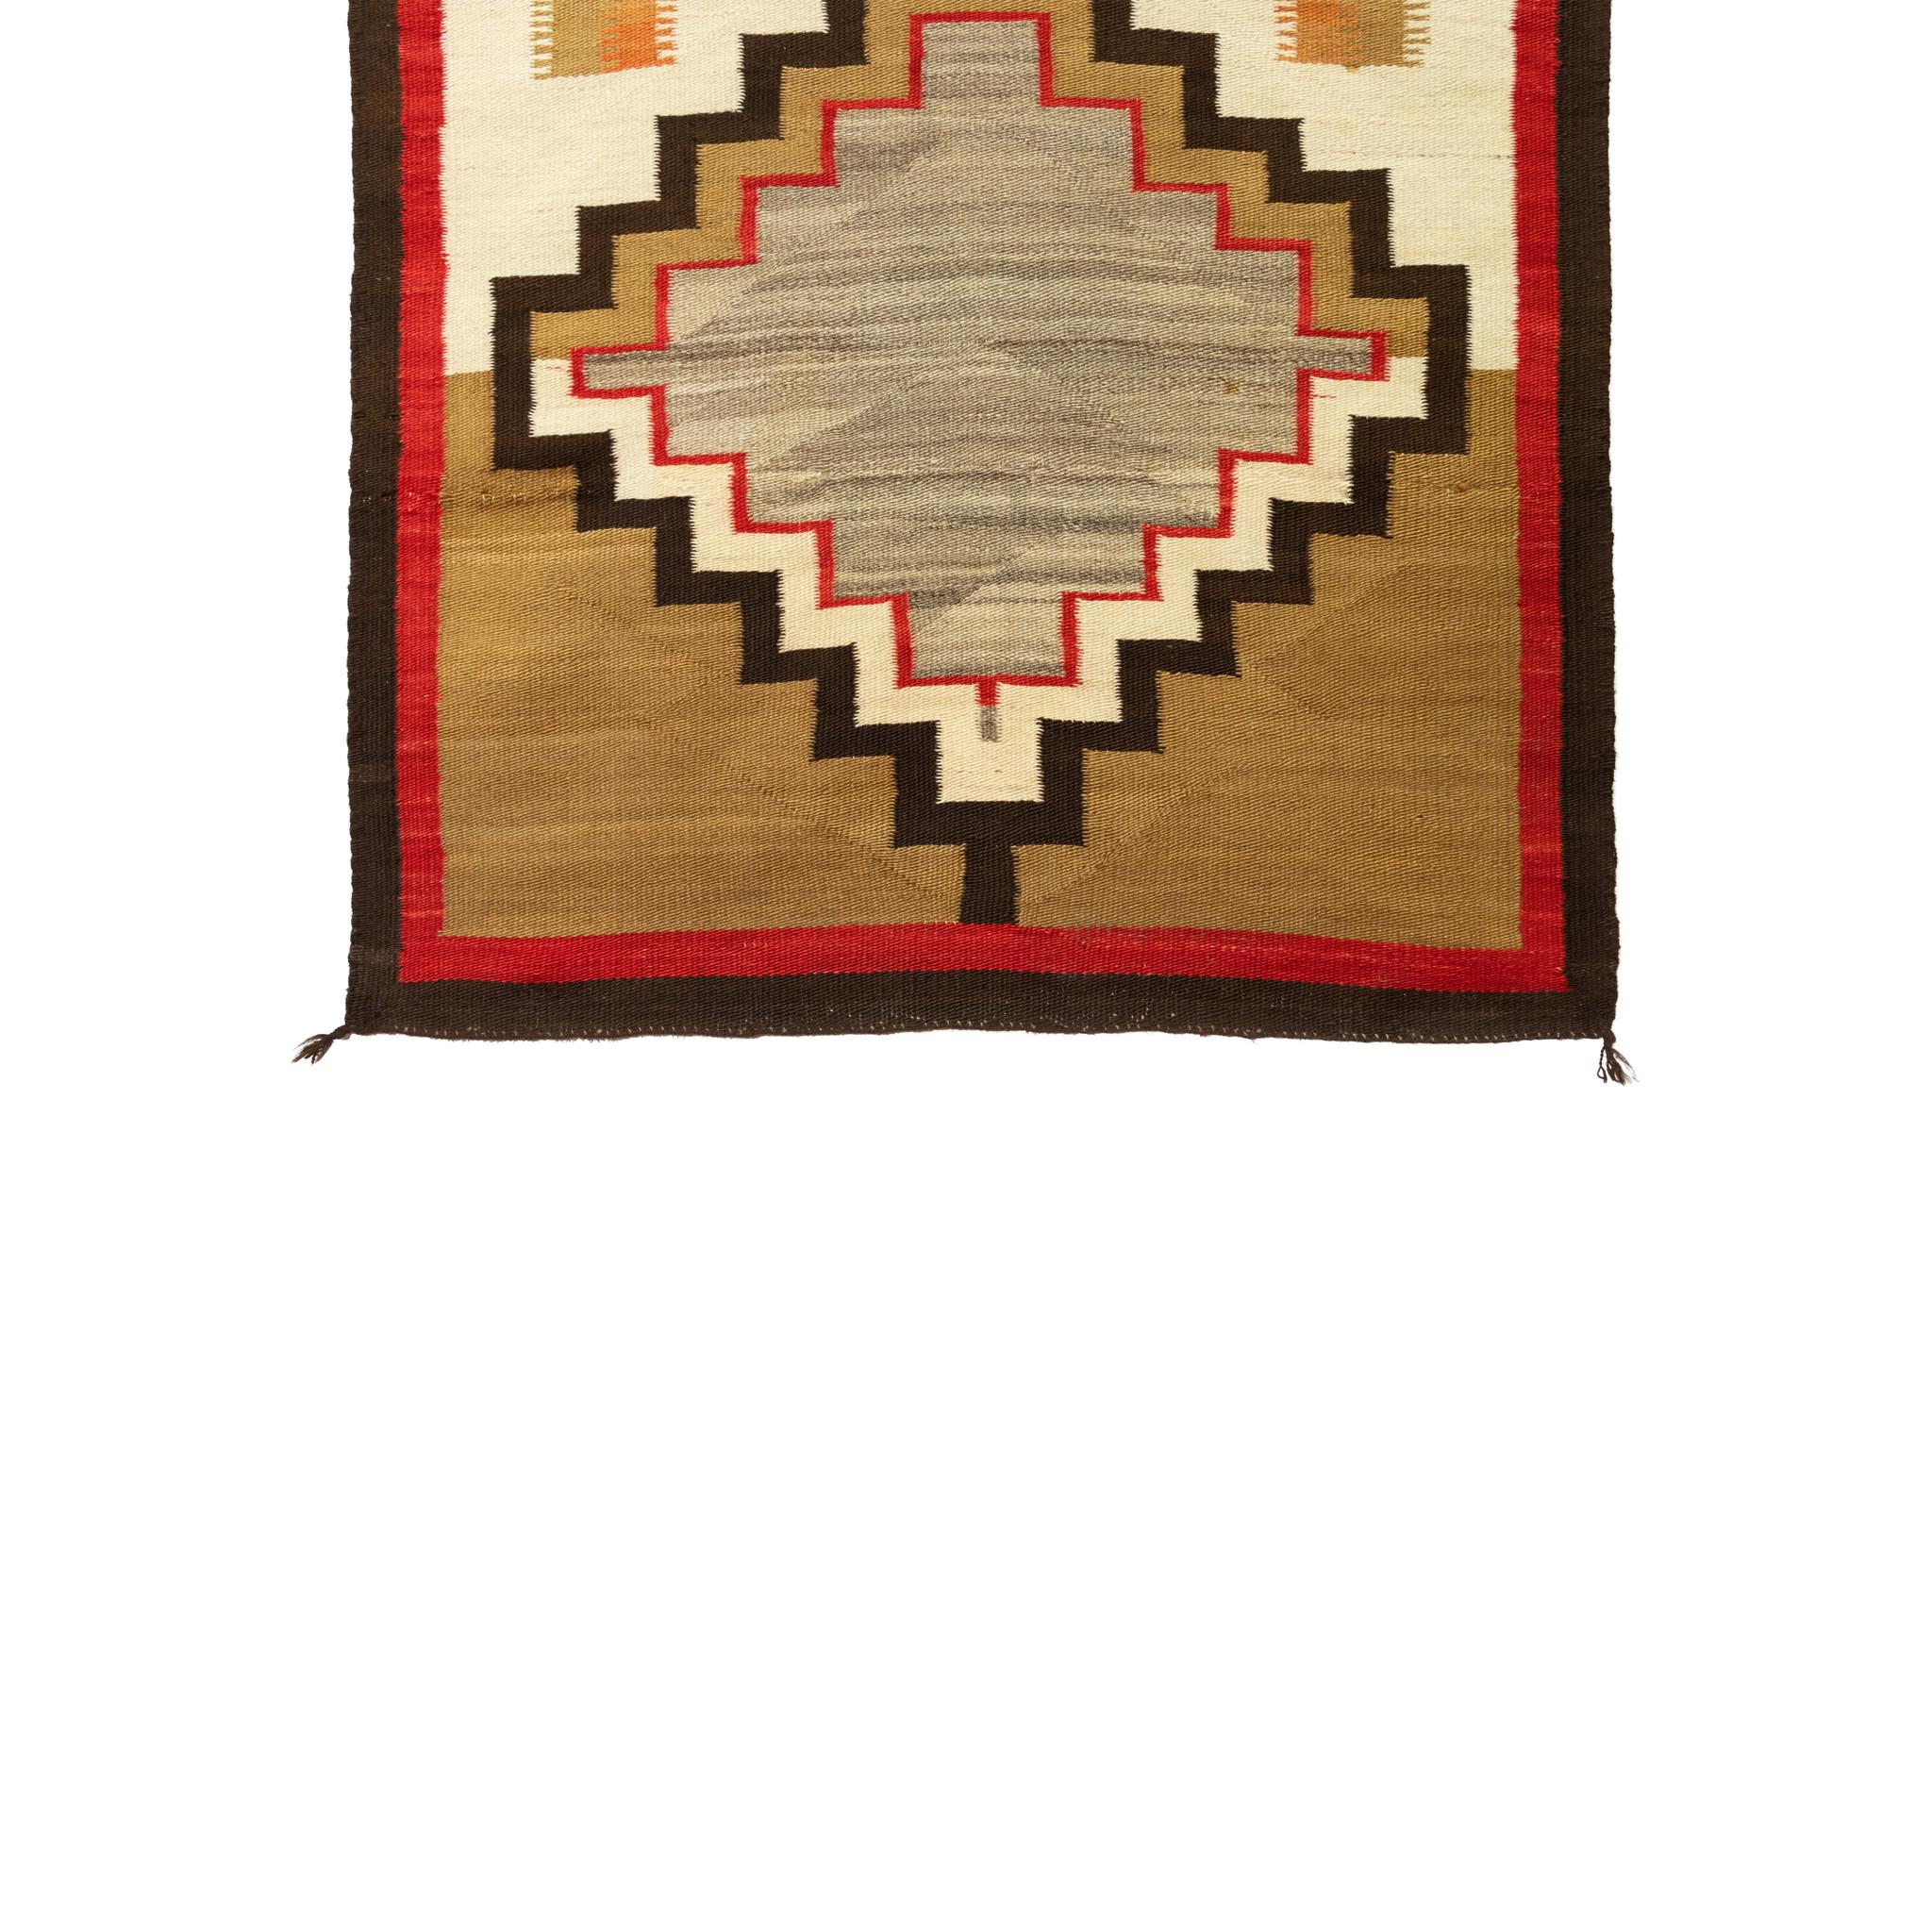 Navajo crystal with graphic black and red borders. 6'2